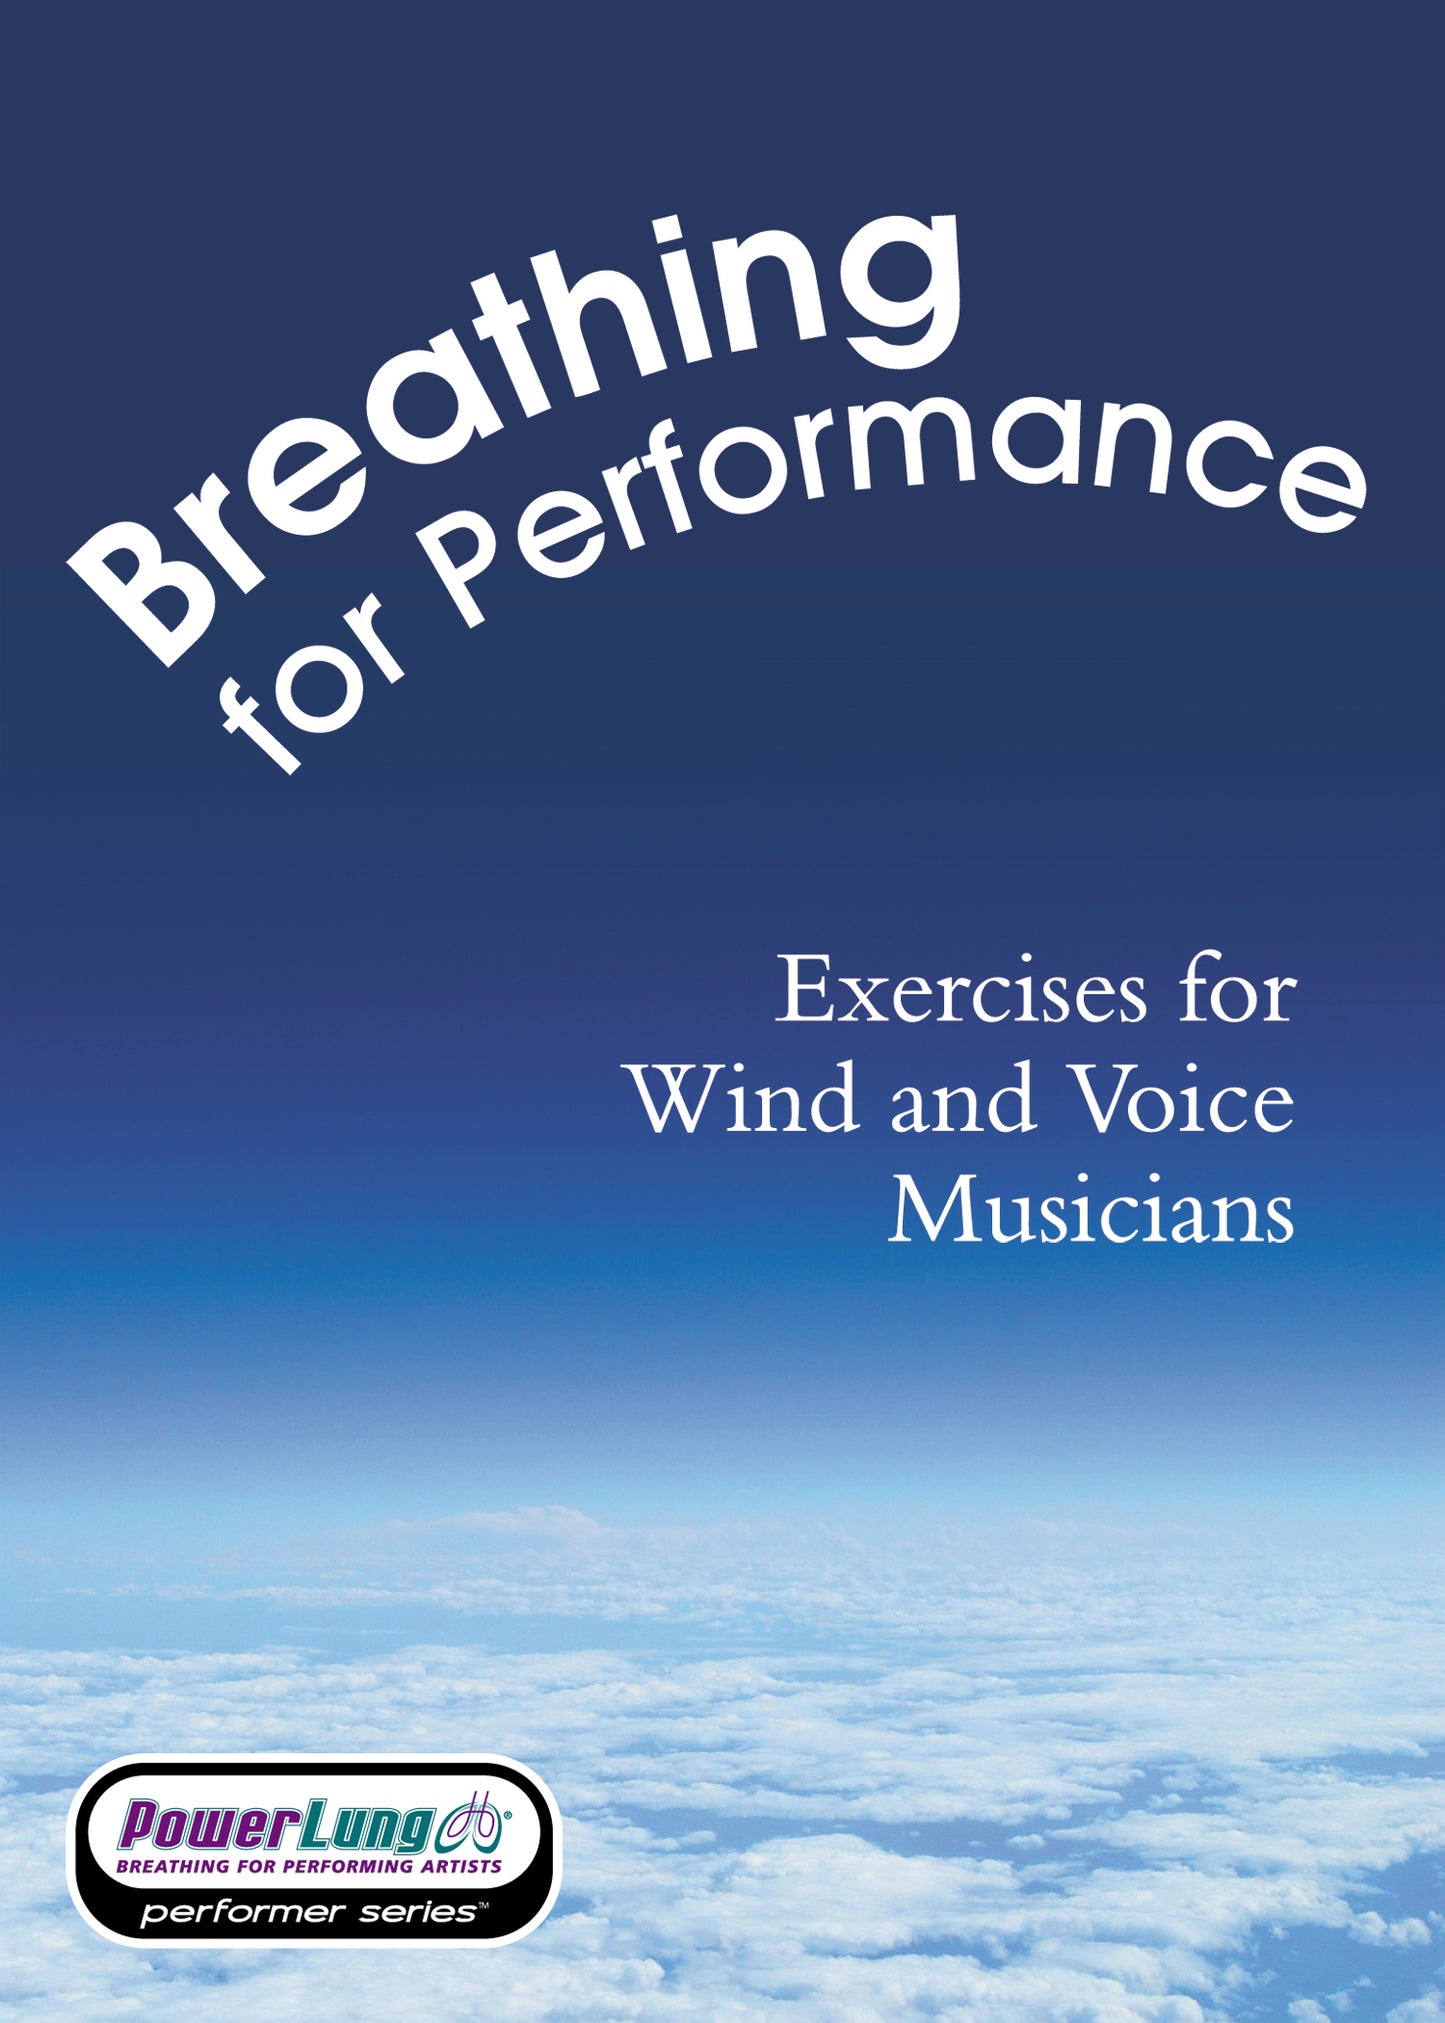 Breathing for Performance - Exercises for Wind & Voice Musicians